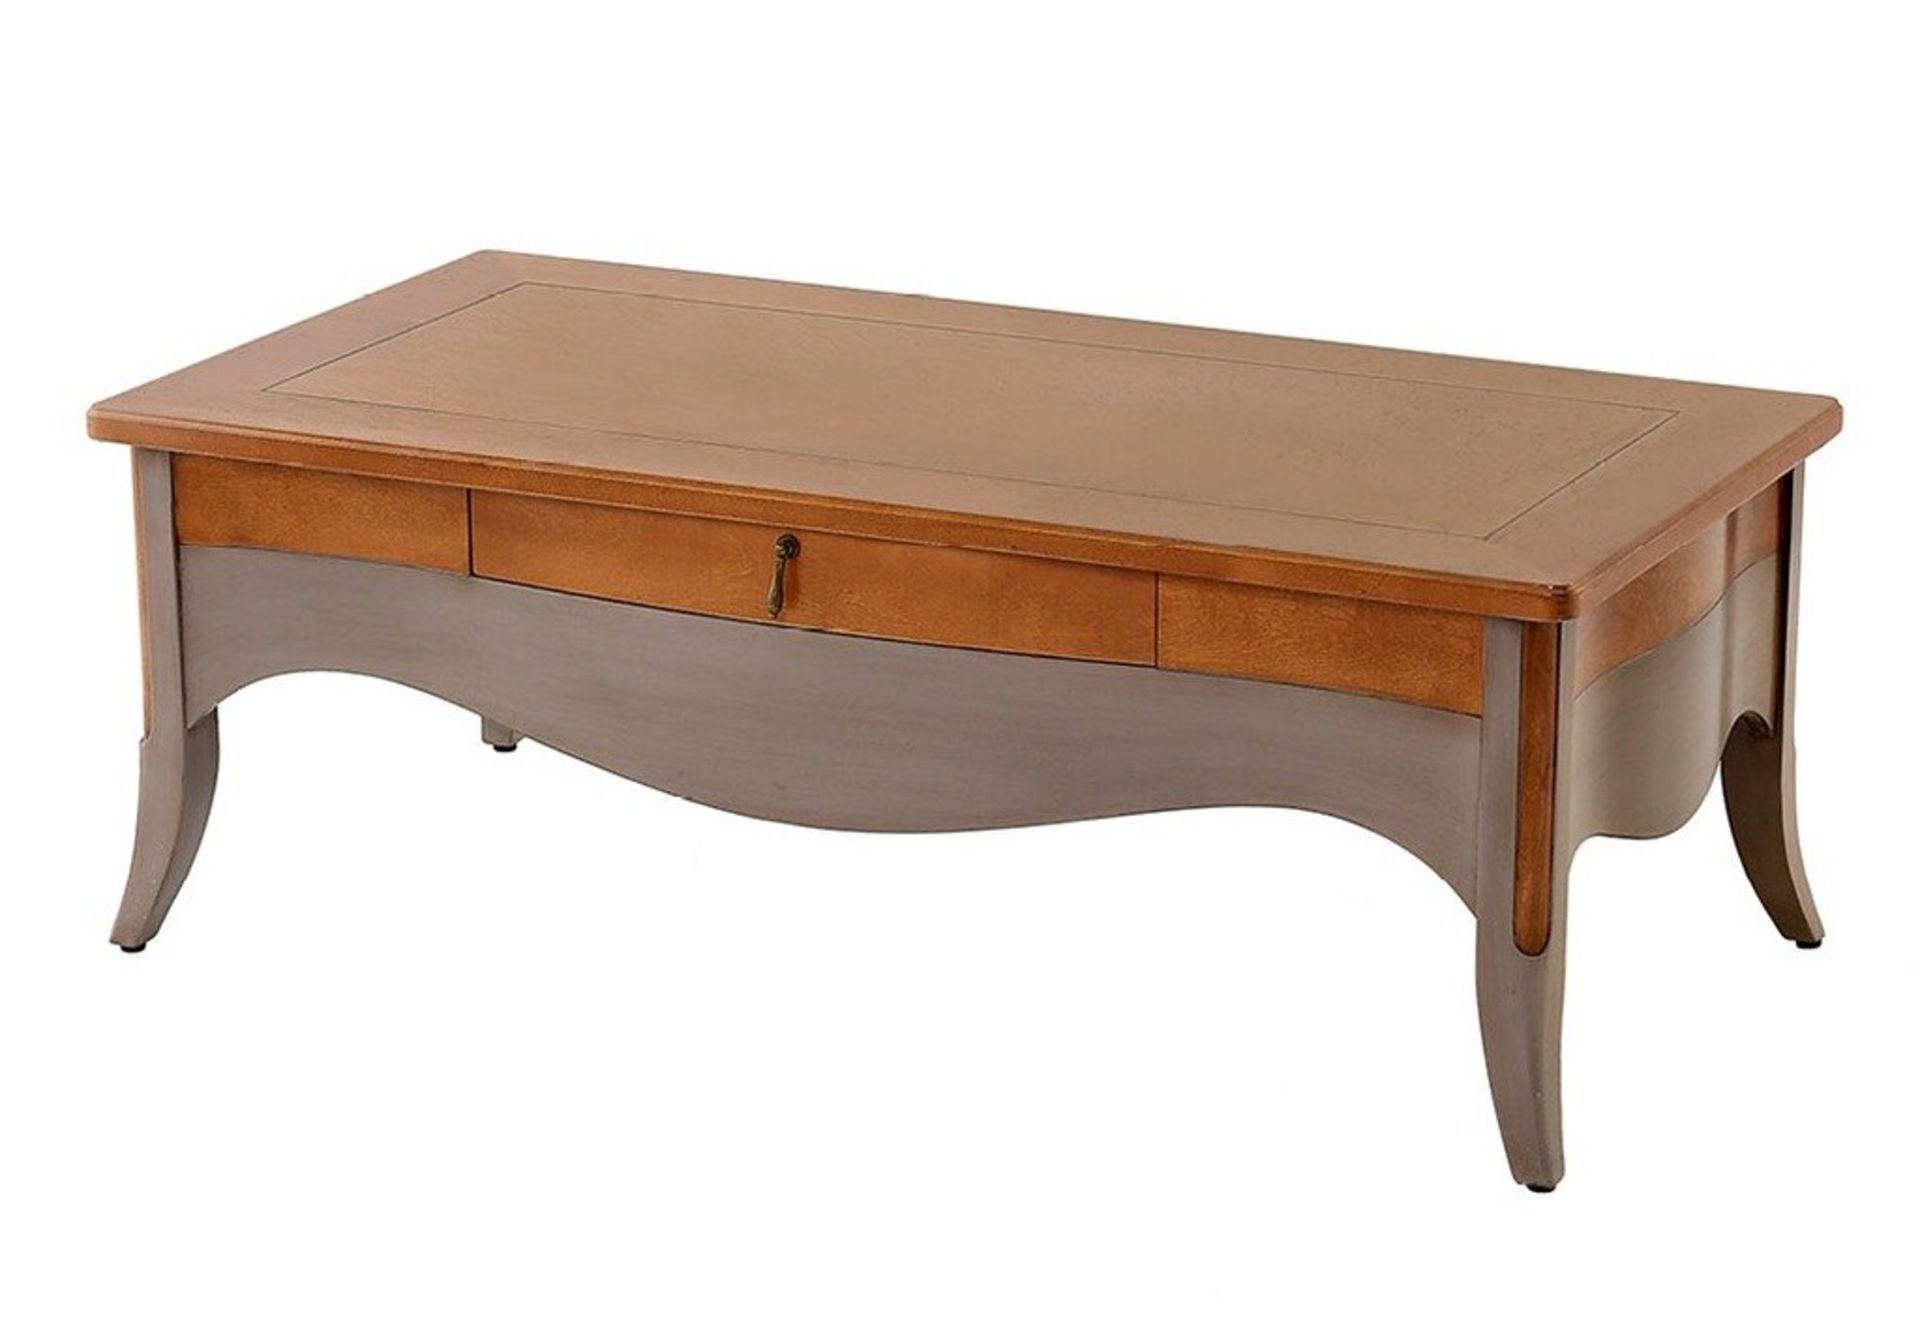 Dawson Coffee Table Cocoa Grey The Perfect Cross Between A Modern Finish And A Traditional Touch - Image 2 of 2